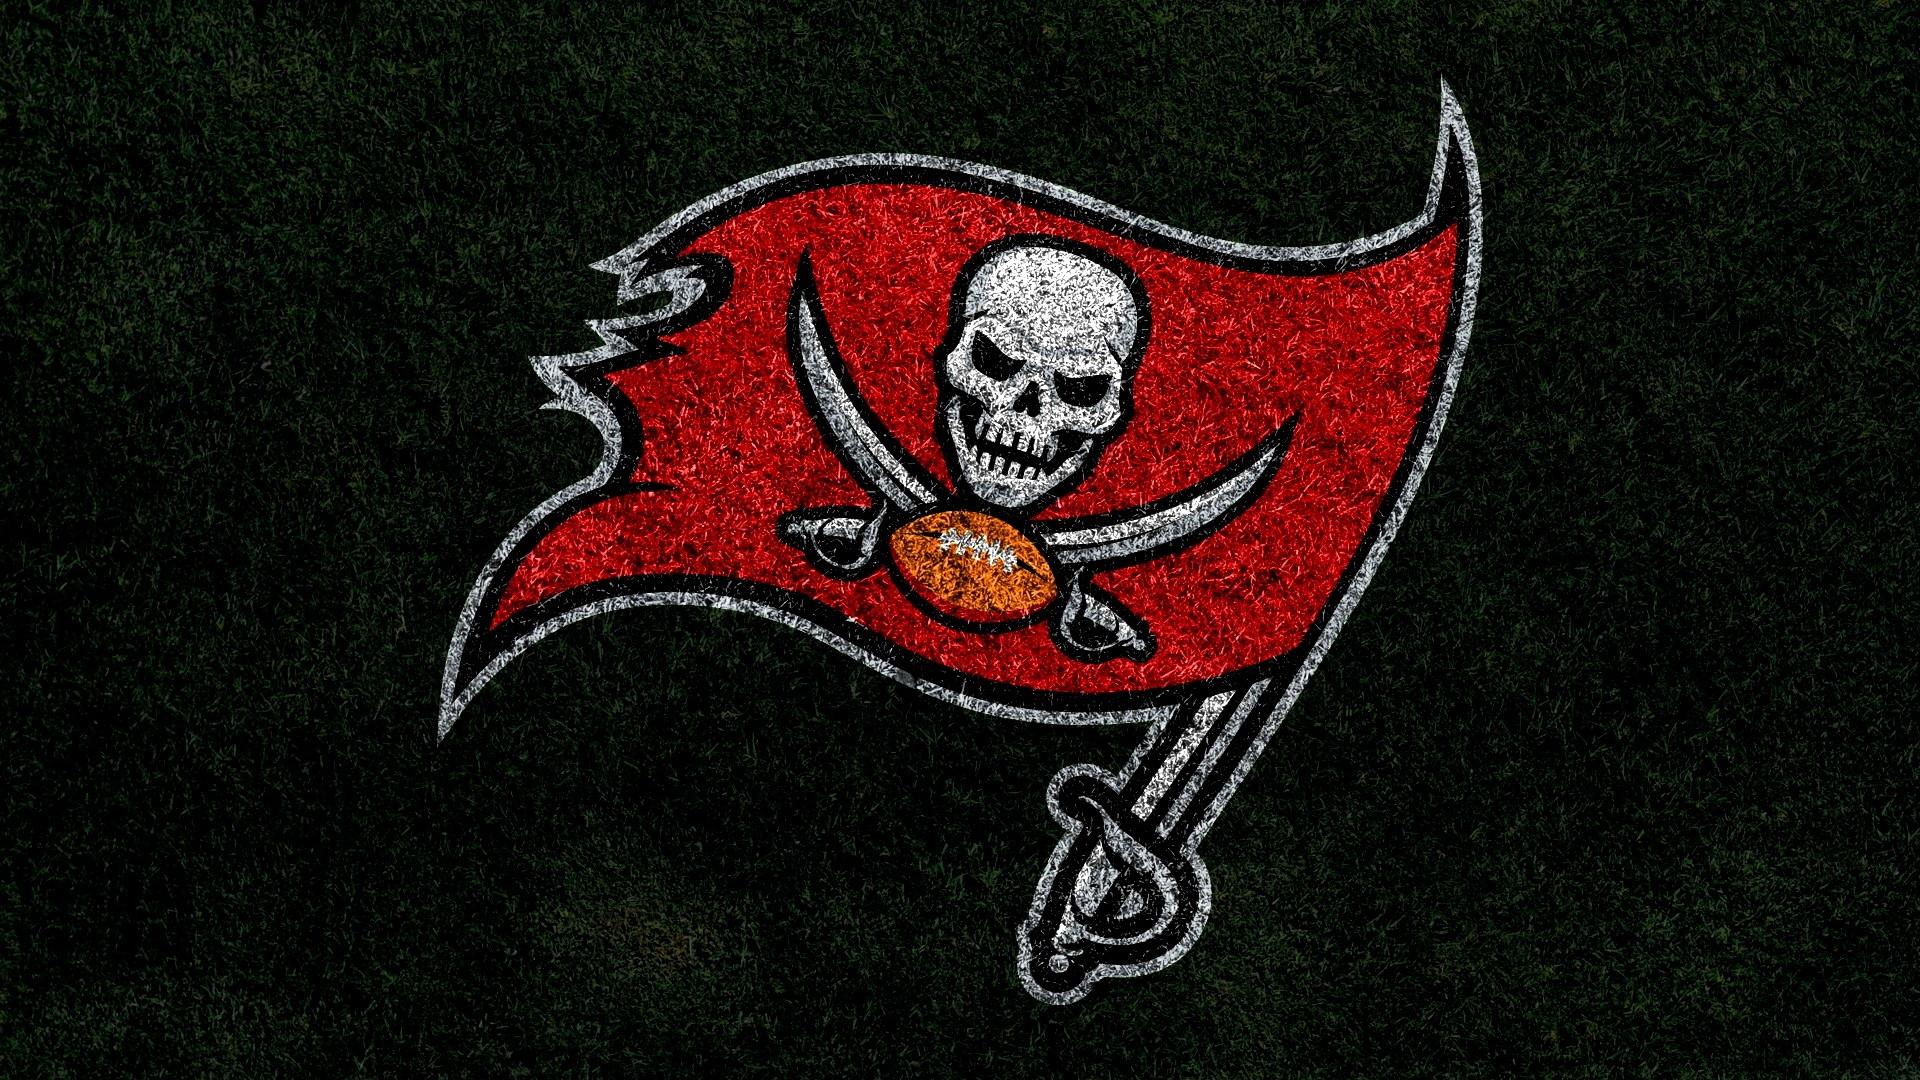 Wallpaper of Tampa Bay Buccaneers with high-resolution 1920x1080 pixel. You can use and set as wallpaper for Notebook Screensavers, Mac Wallpapers, Mobile Home Screen, iPhone or Android Phones Lock Screen